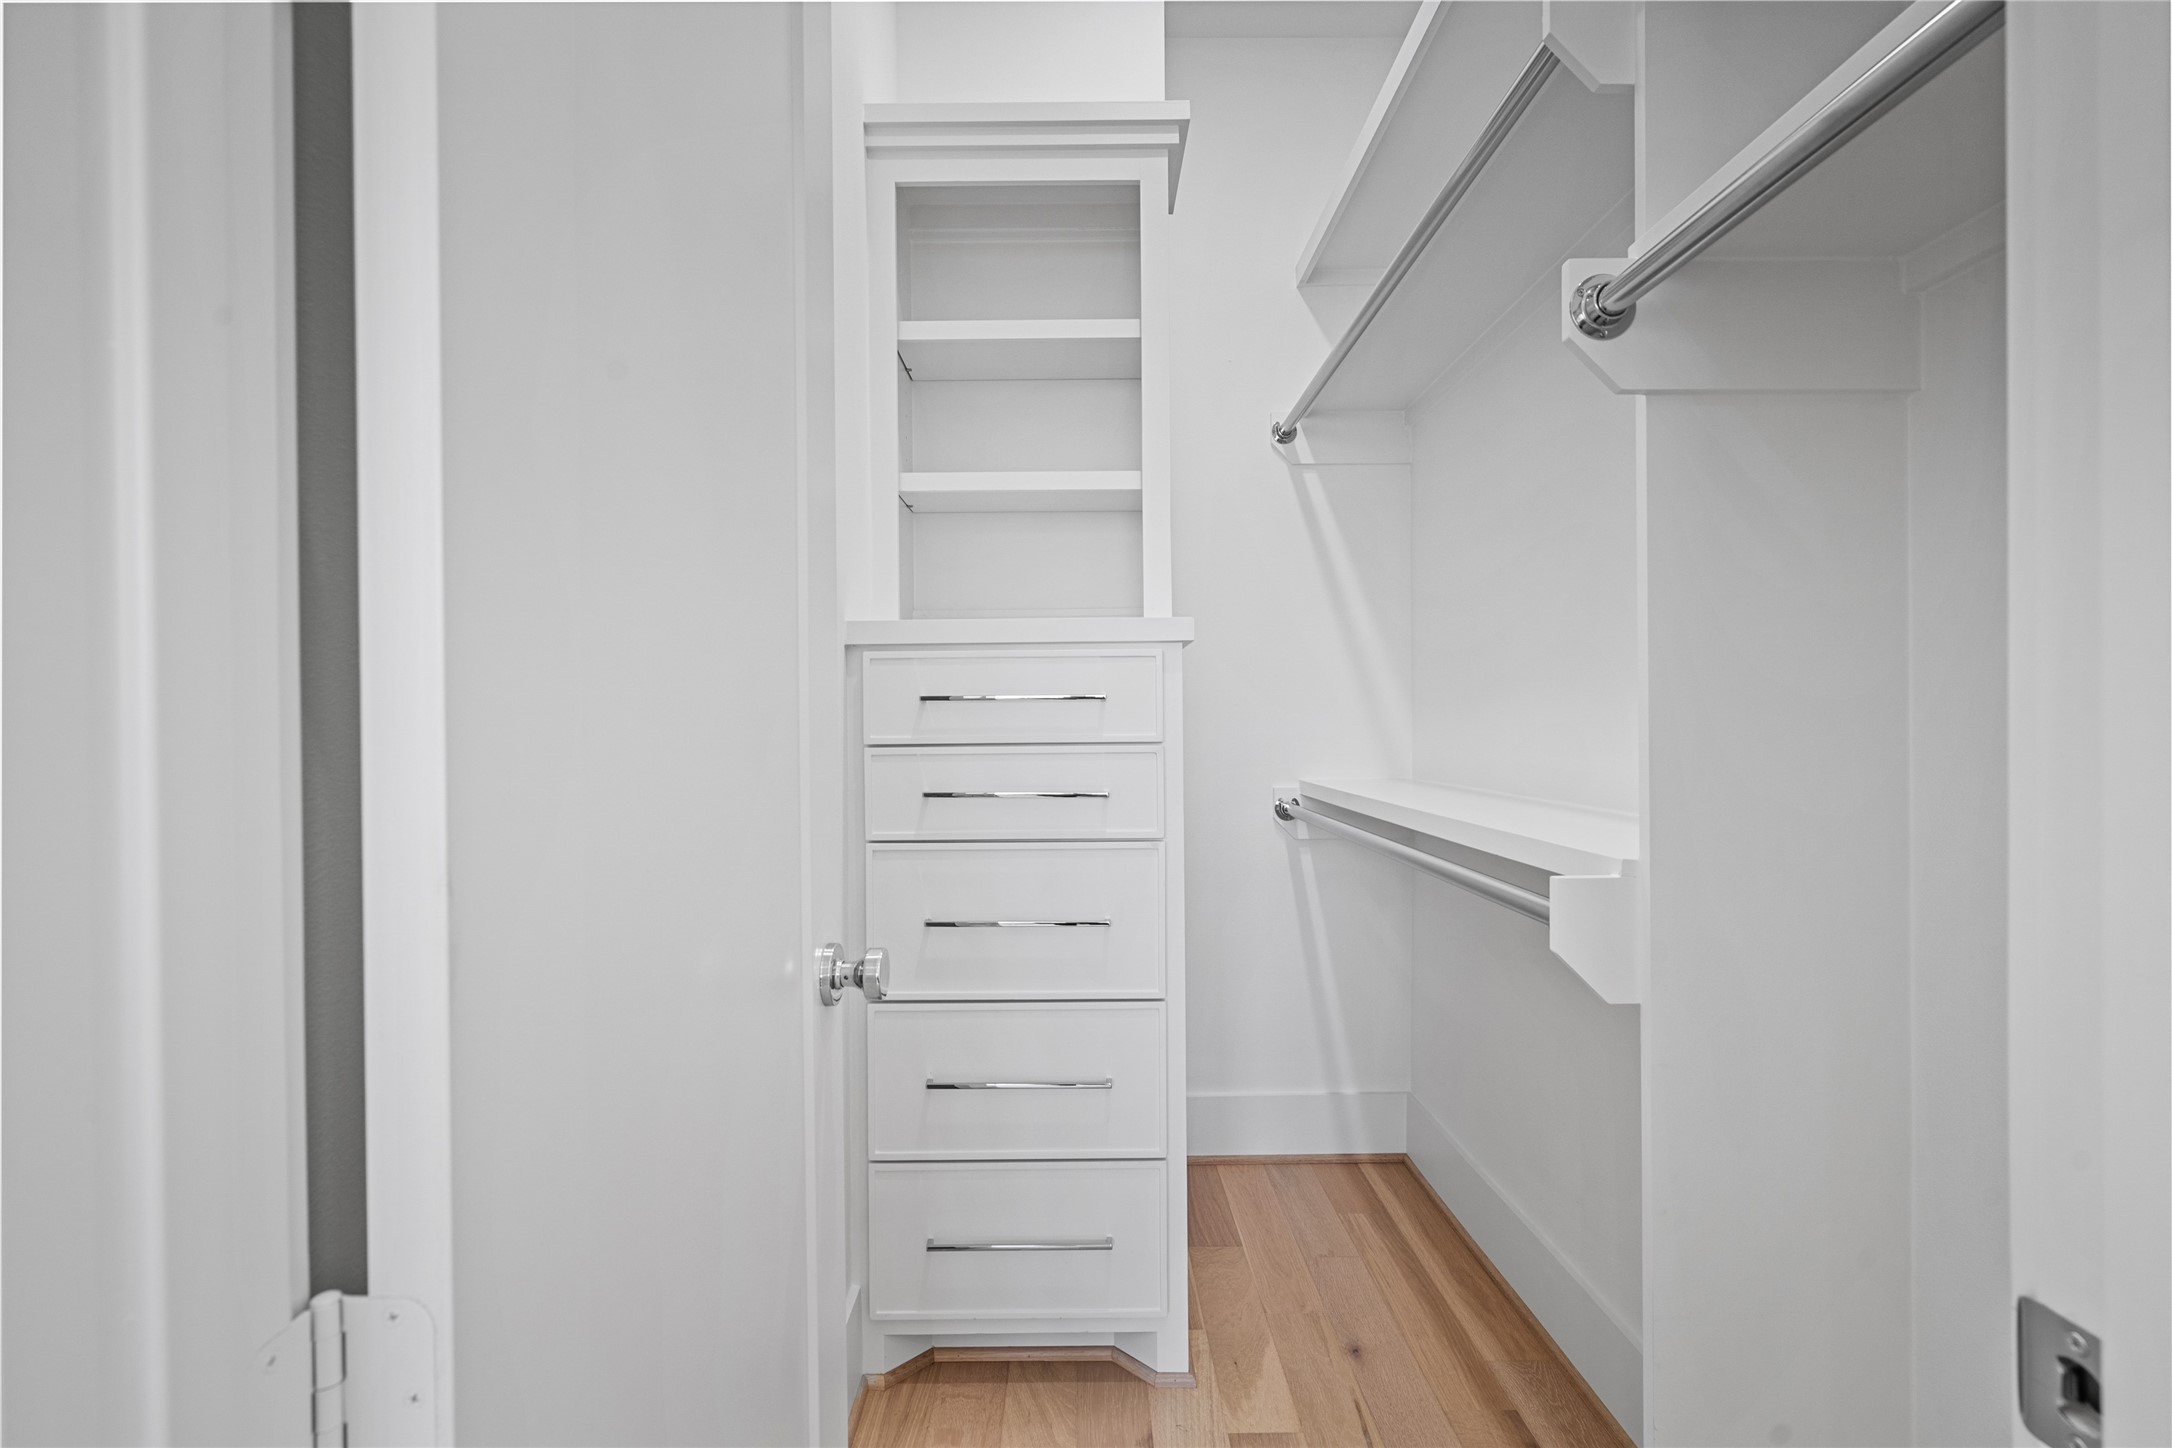 Storage is in abundance throughout the house, here is the walk-in closet for the secondary bedroom pictured before.